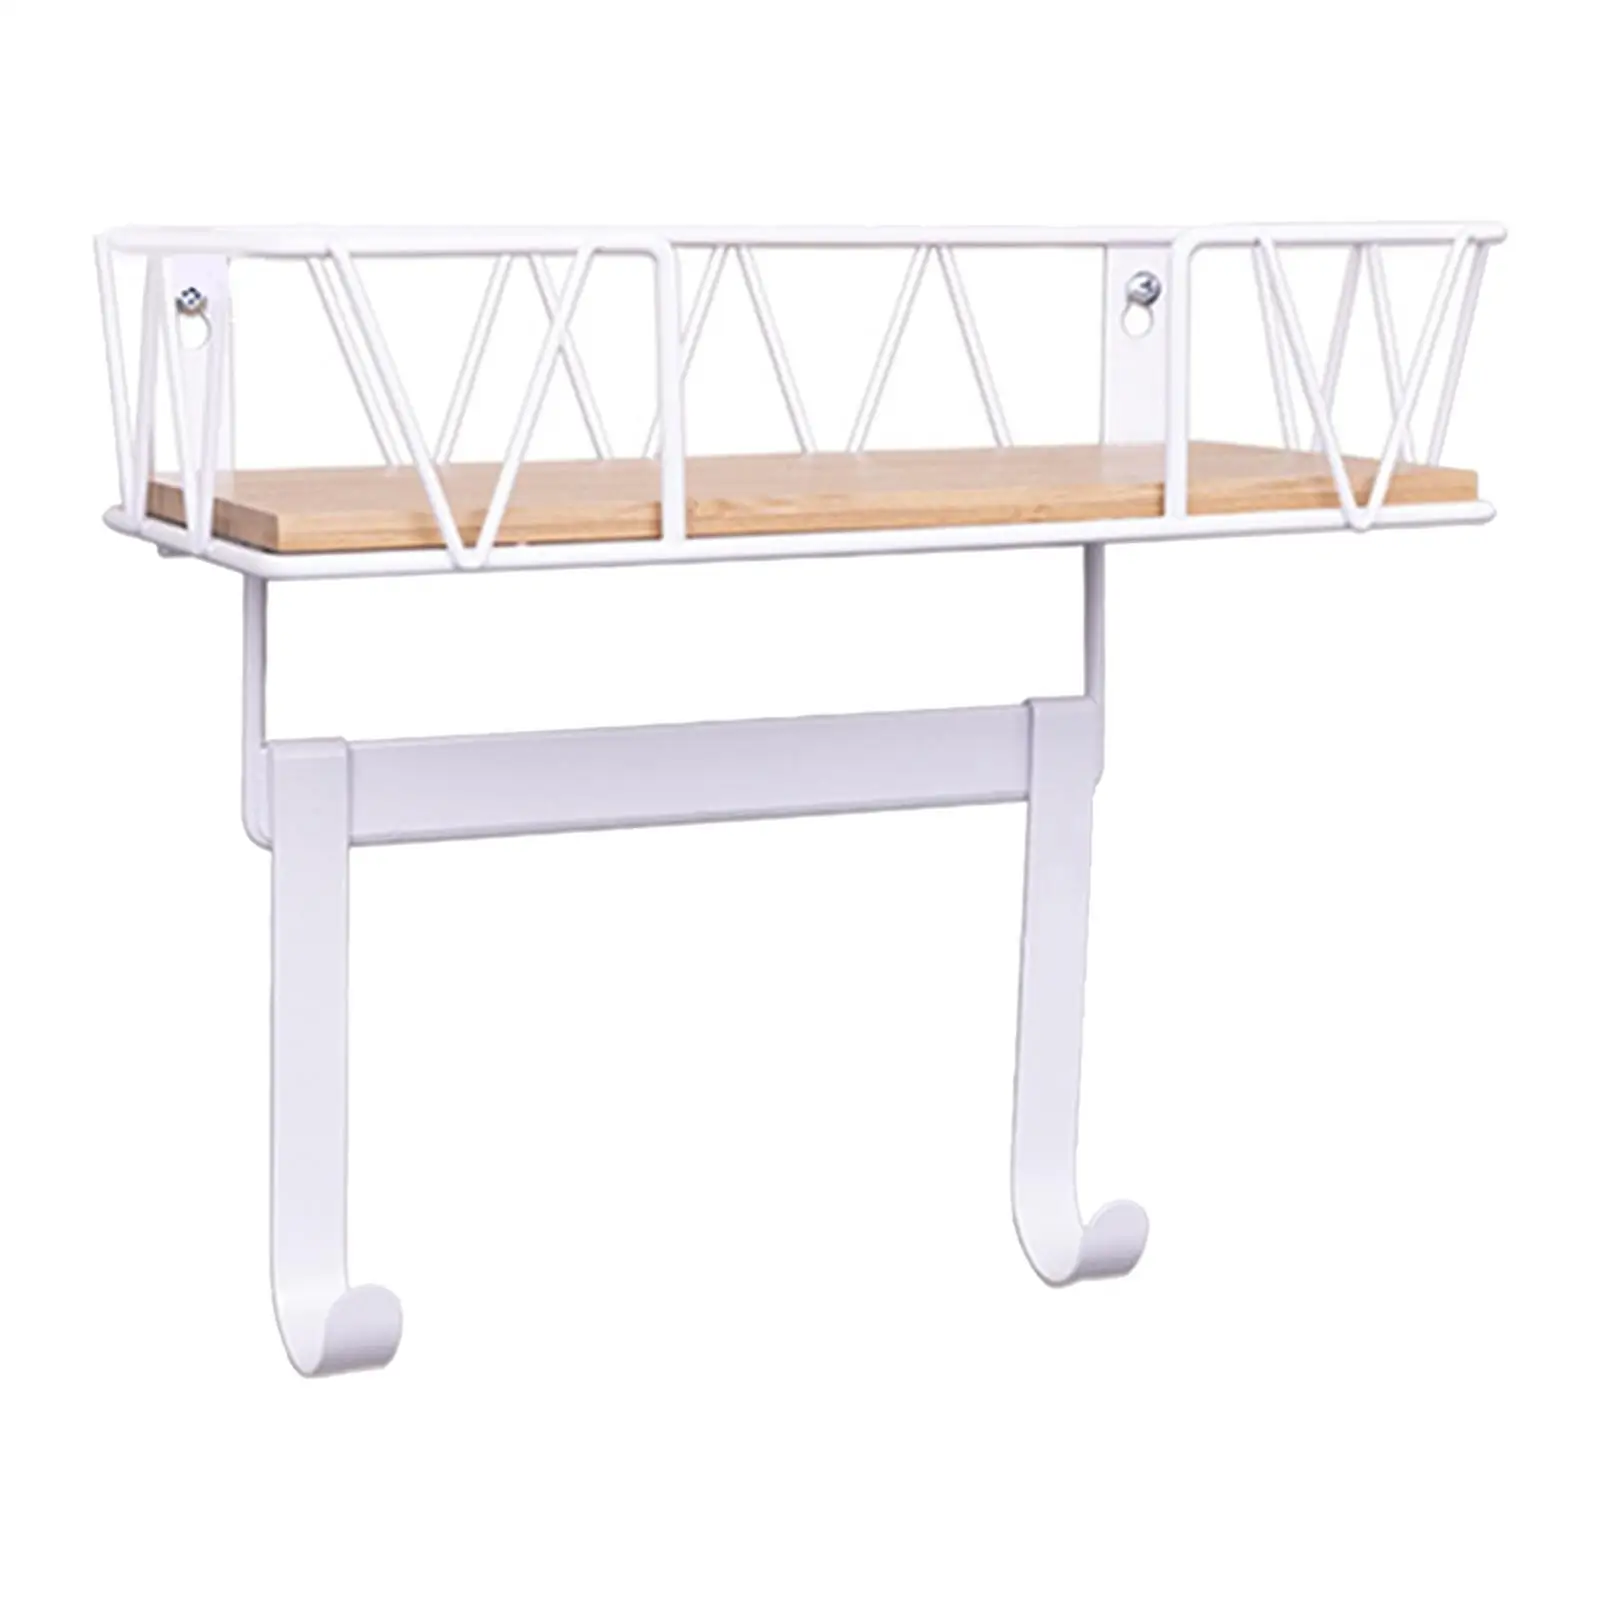 Ironing Board Holder with Removable Hanger Hooks Iron Tools Accessories Organizer Wall Mounted Storage Rack Laundry Room Decor